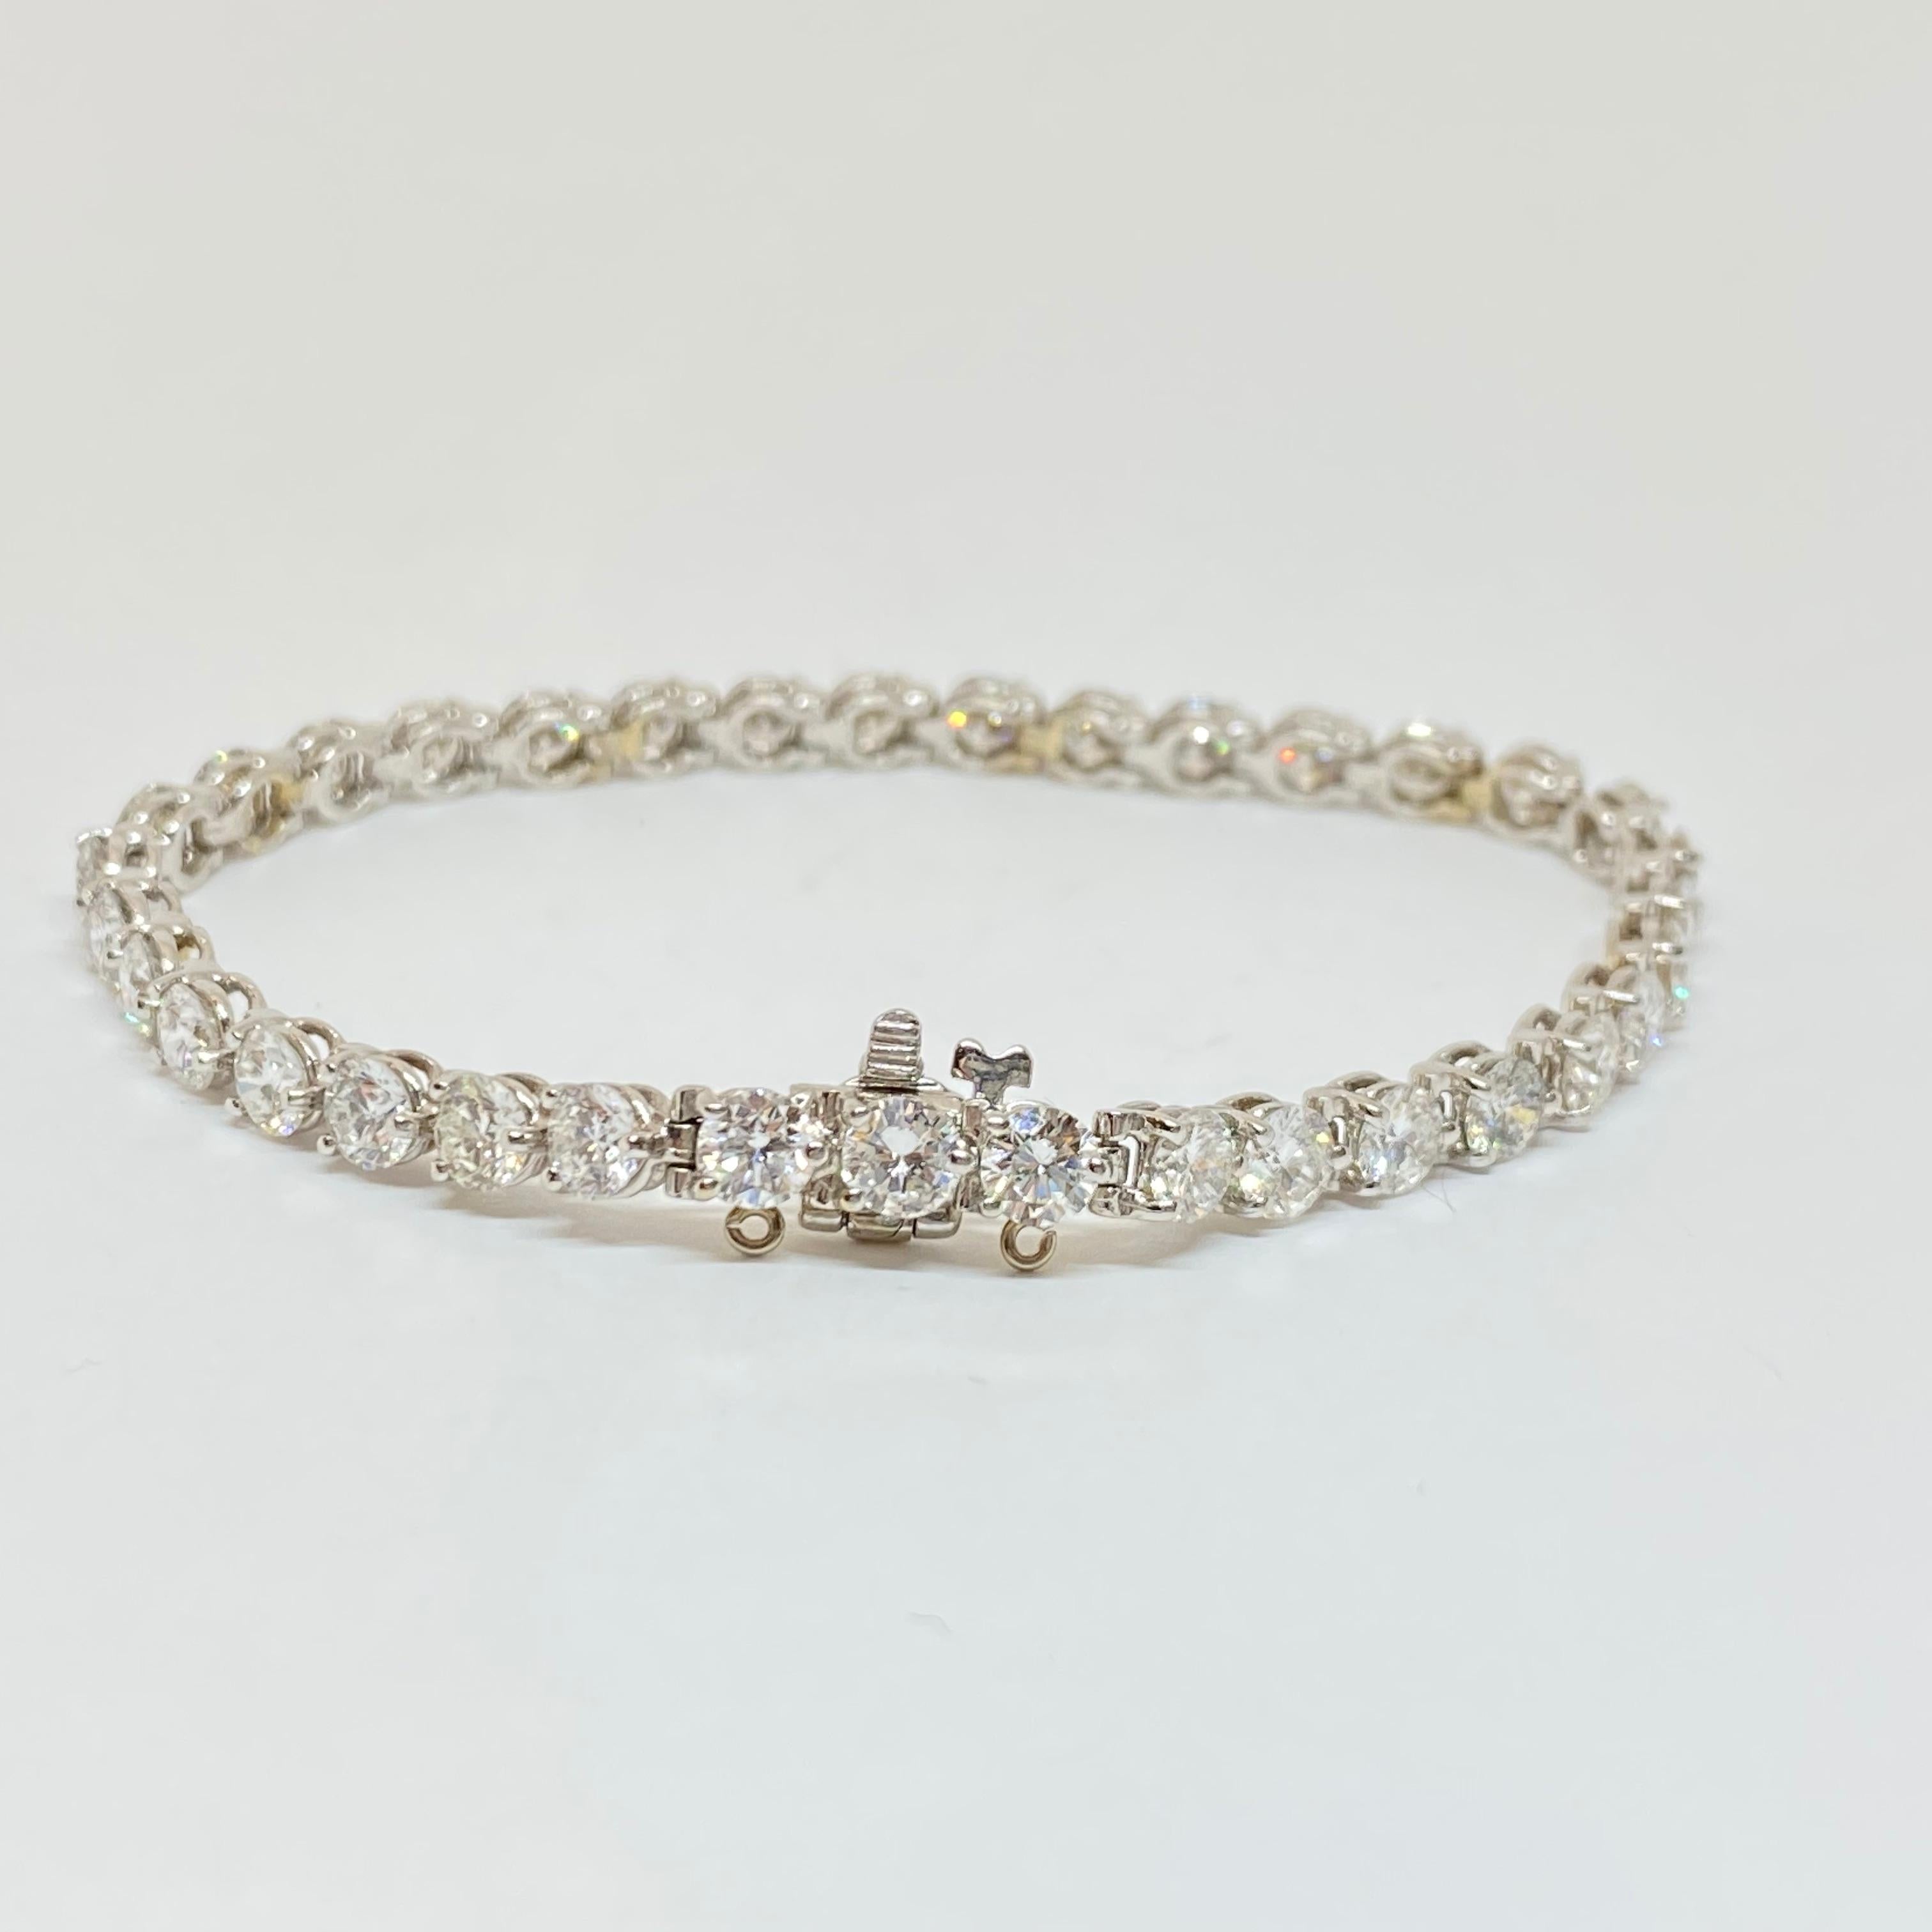 Elegant classic tennis bracelet in like new condition designed in premium 18 karat white gold. Set with round brilliant cut diamonds in three prong settings, attached to a secure box and tongue clasp and safety.  The bracelet measures 4mm wide and